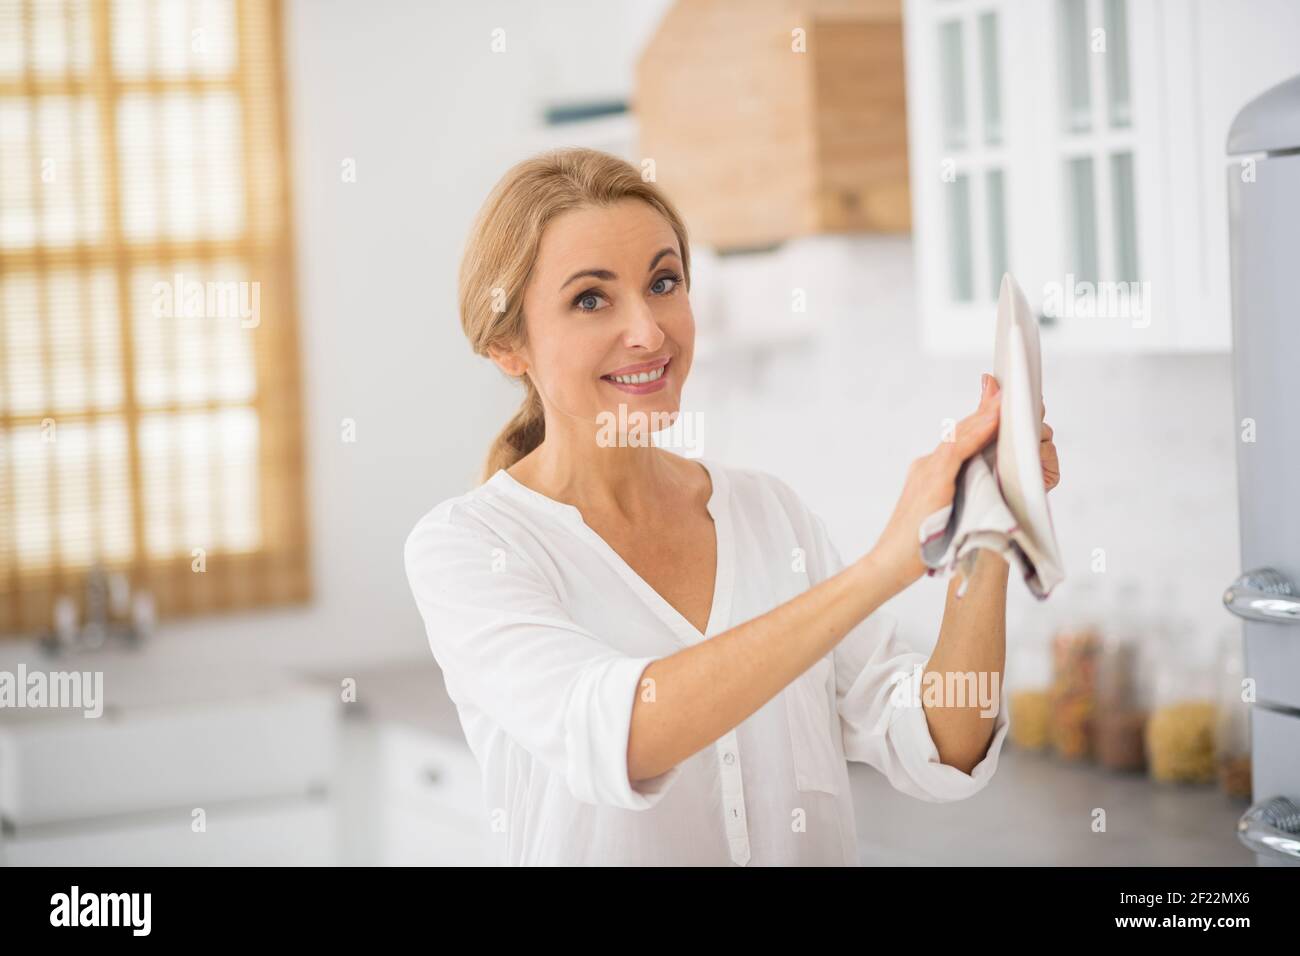 Blonde cute housewife holding a plate in her hands Stock Photo